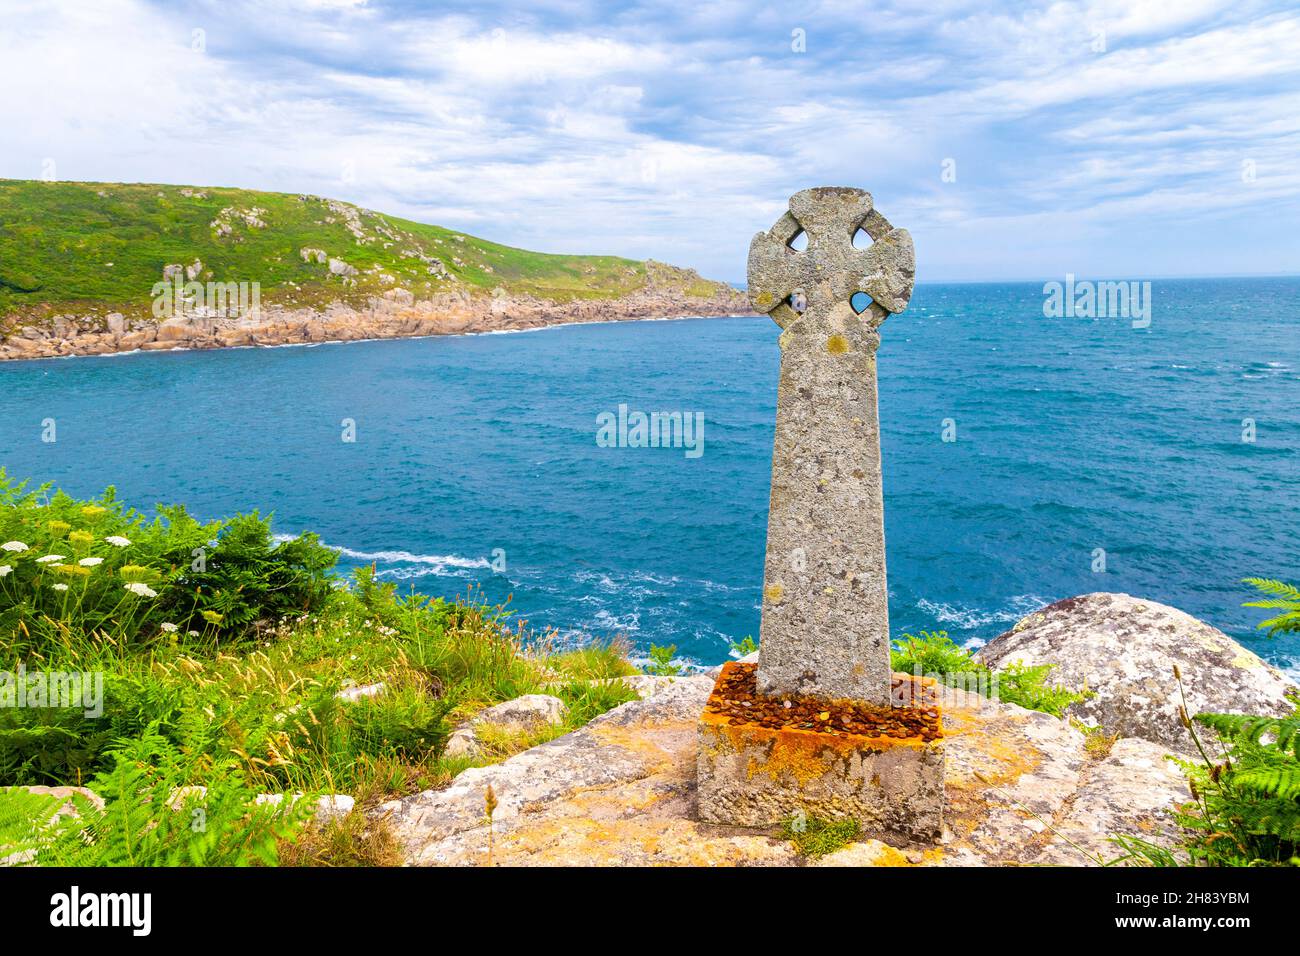 Celtic cross commemorating the death of David Wordsworth Watson, who fell from Carn Mellyn cliffs in 1873 near Lamorna Cove, Cornwall, UK Stock Photo